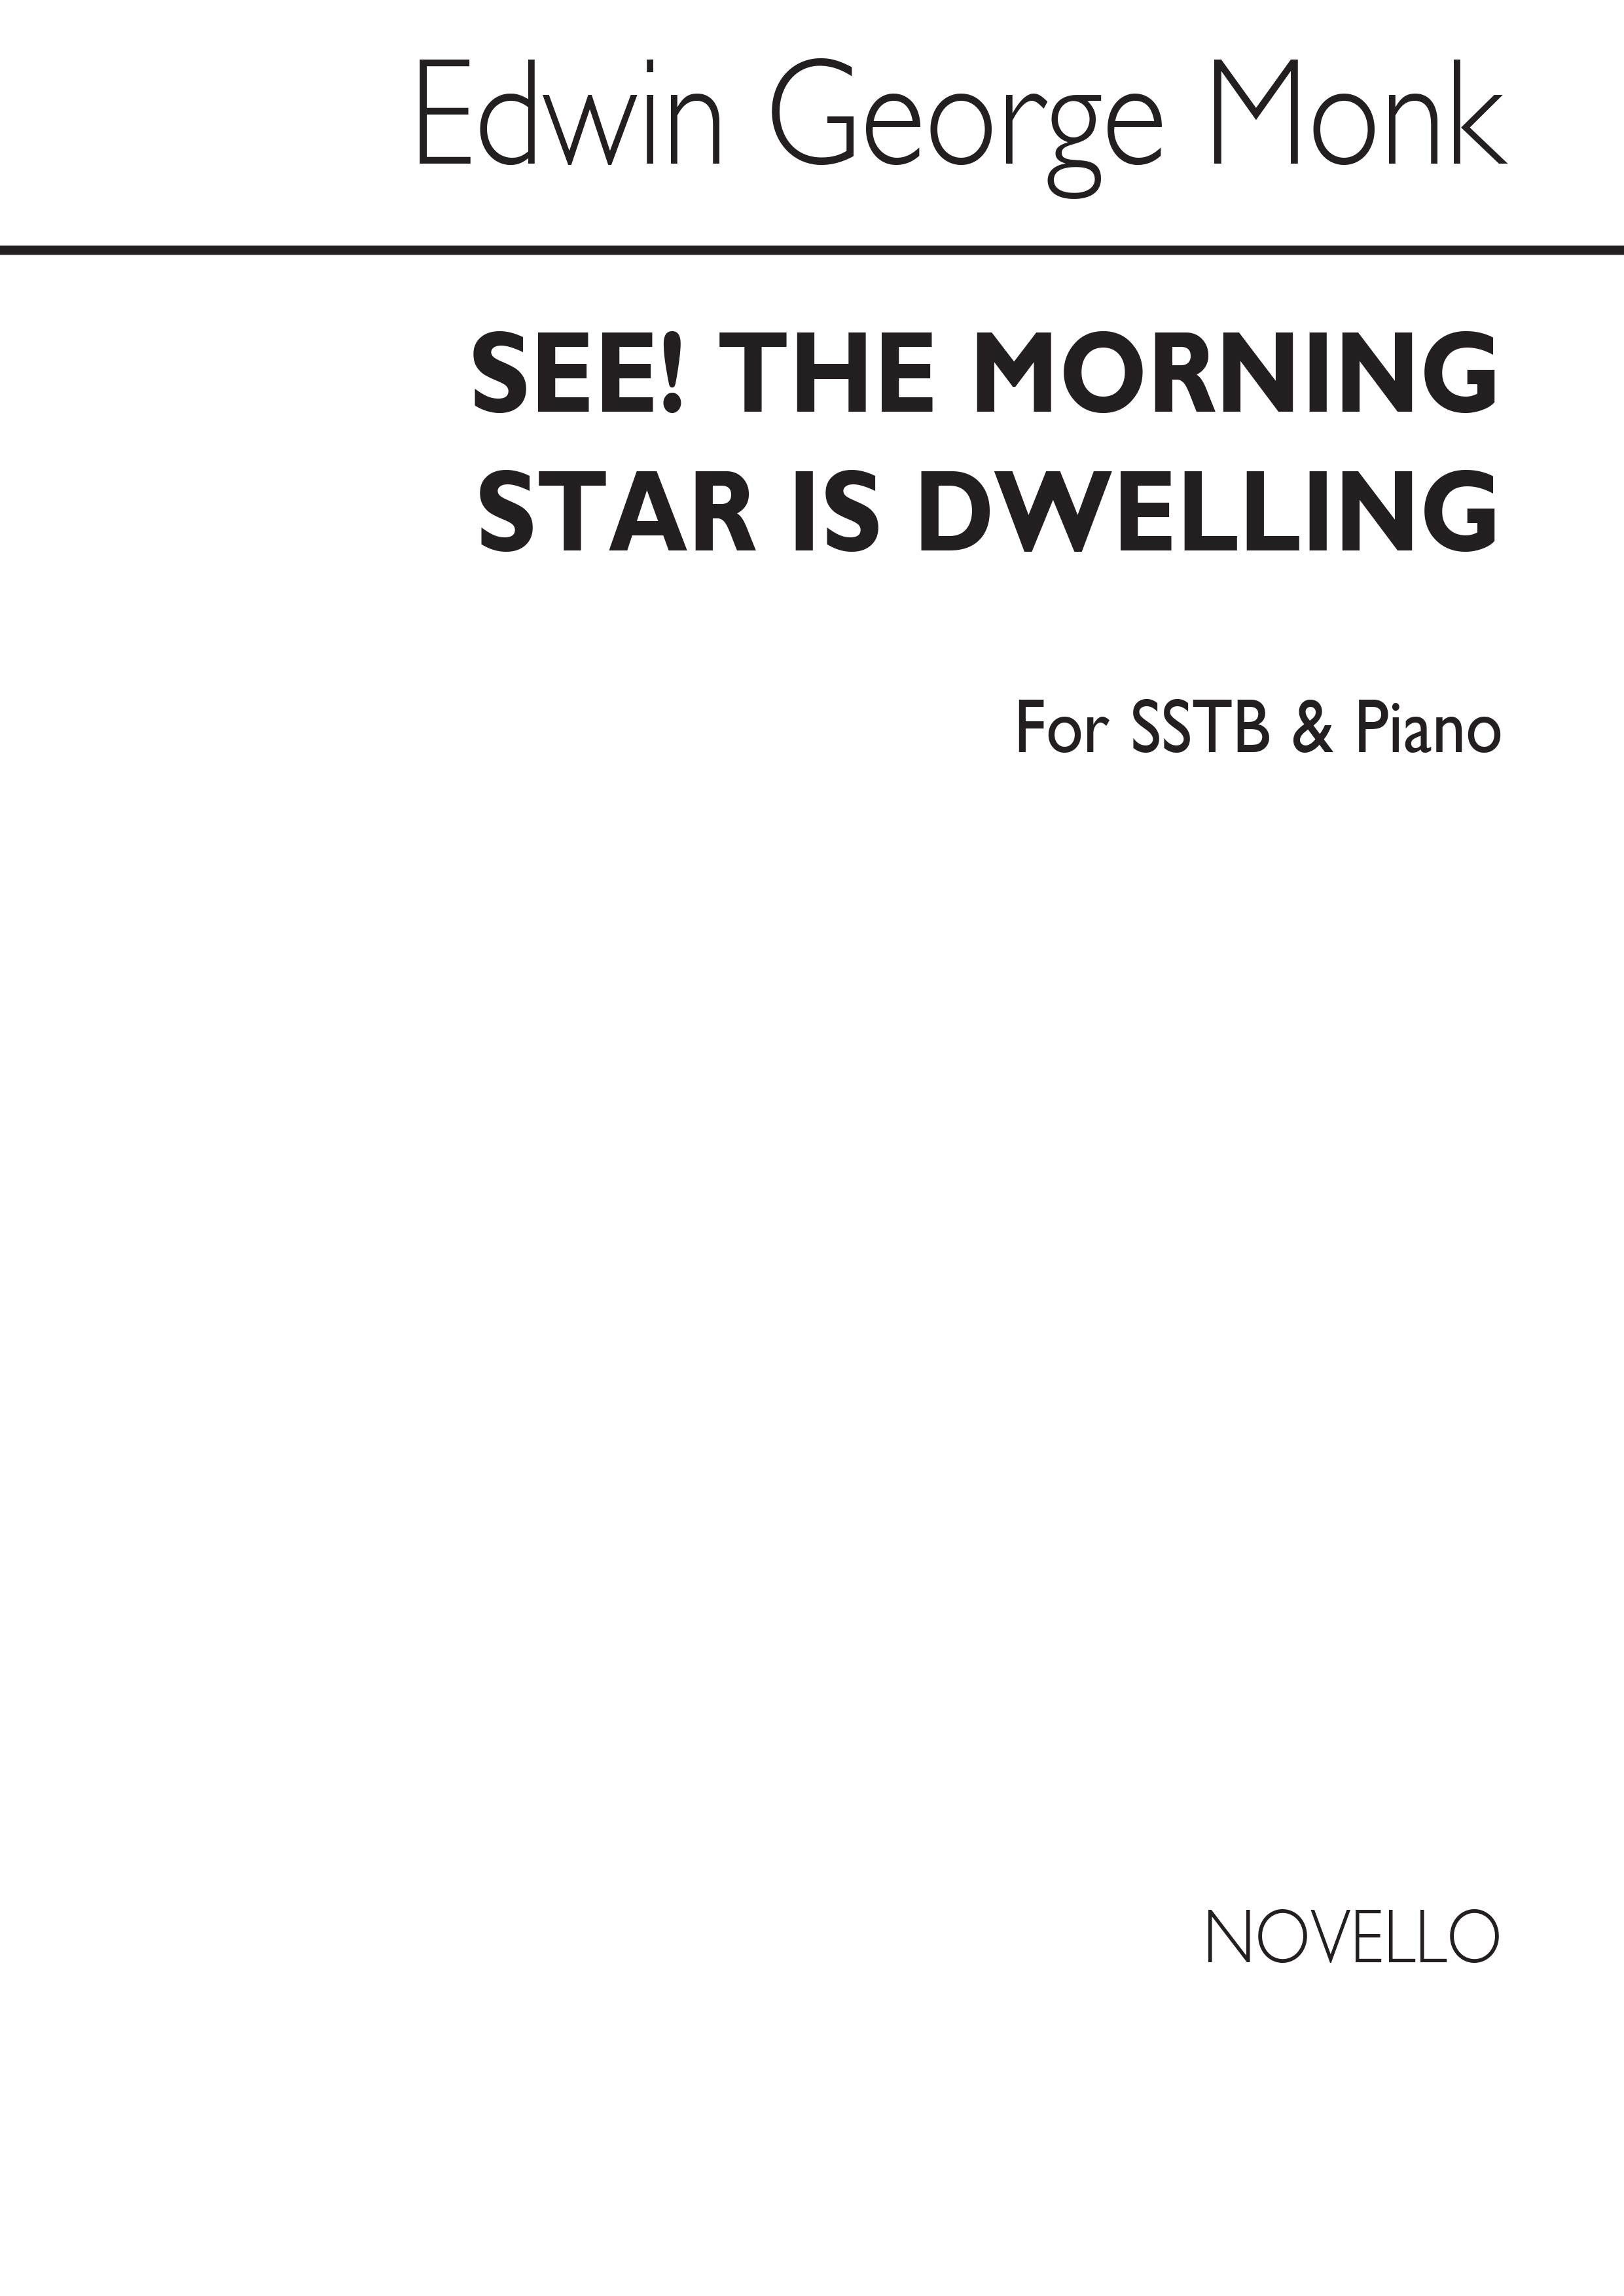 Edwin George Monk: See The Morning Star Is Dwelling Sstb/Piano